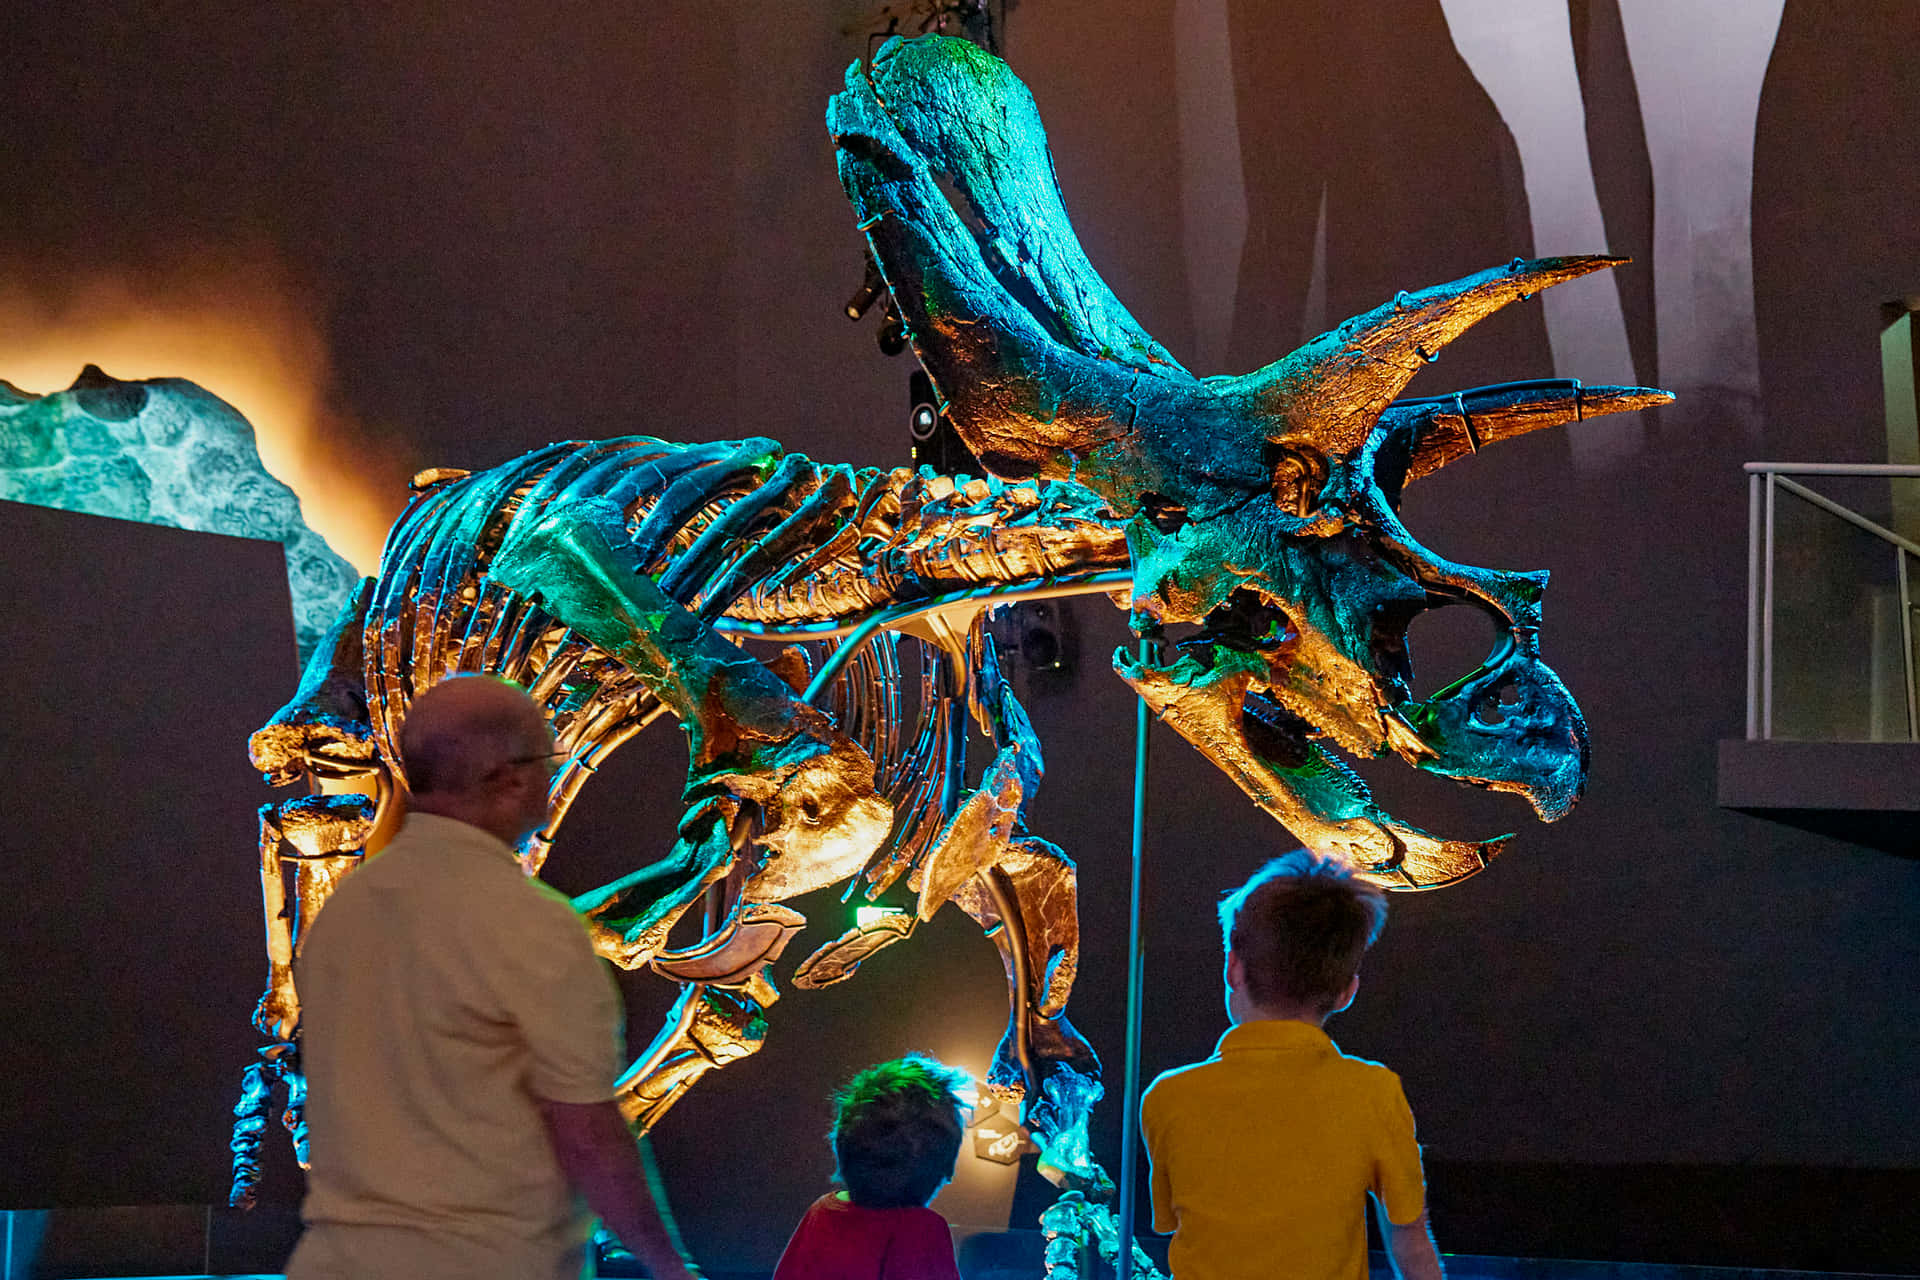 A Group Of Children Looking At A Dinosaur Skeleton